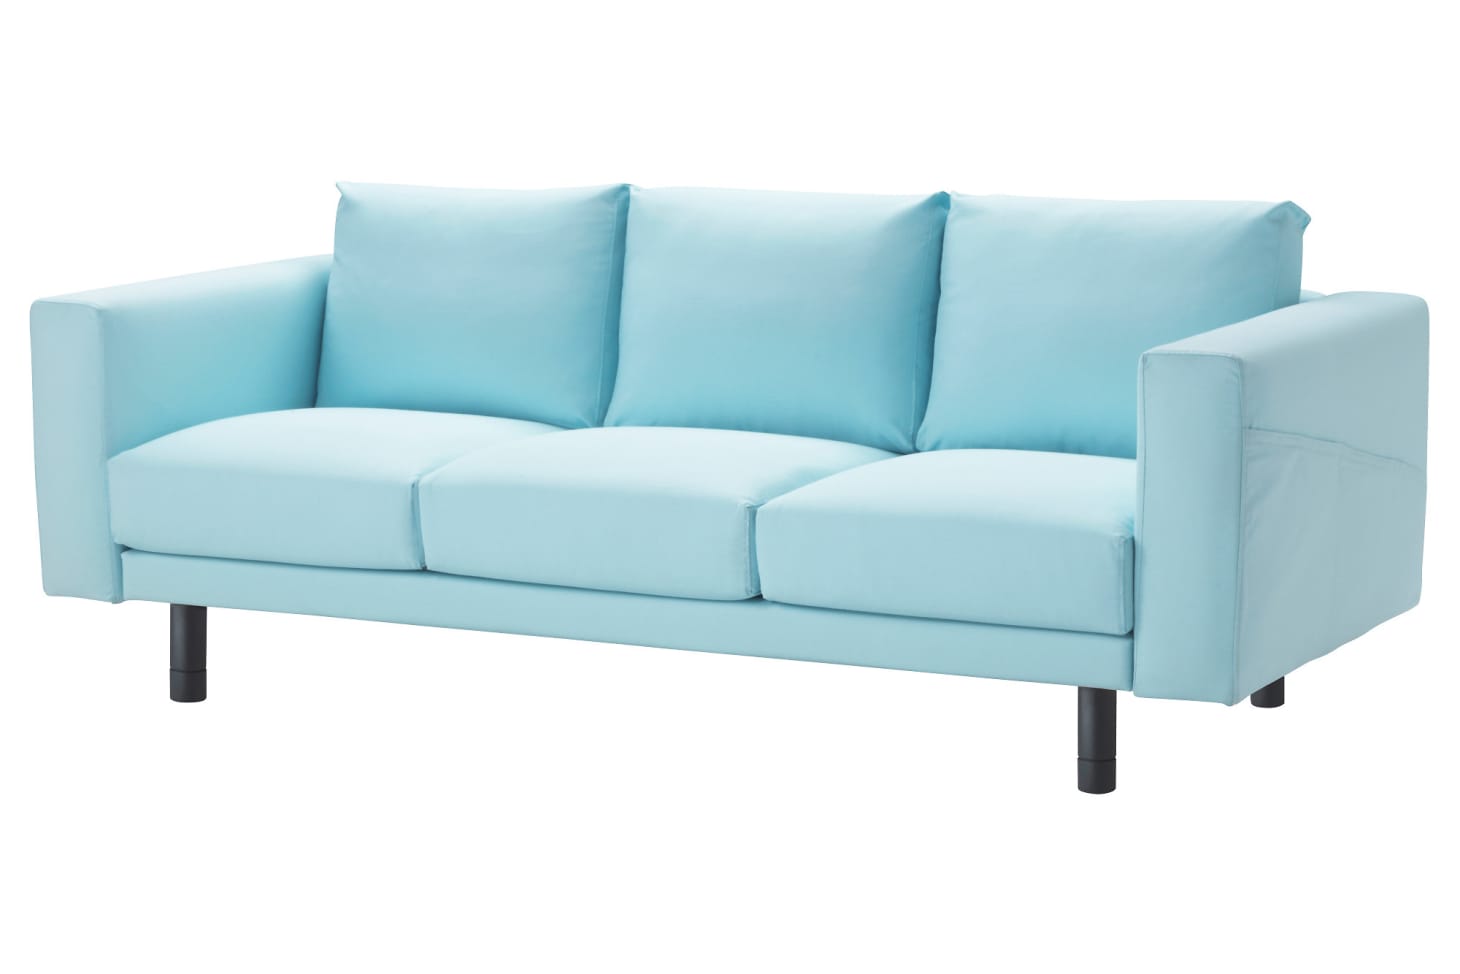 The Best & Most Comfortable IKEA Sofas Apartment Therapy